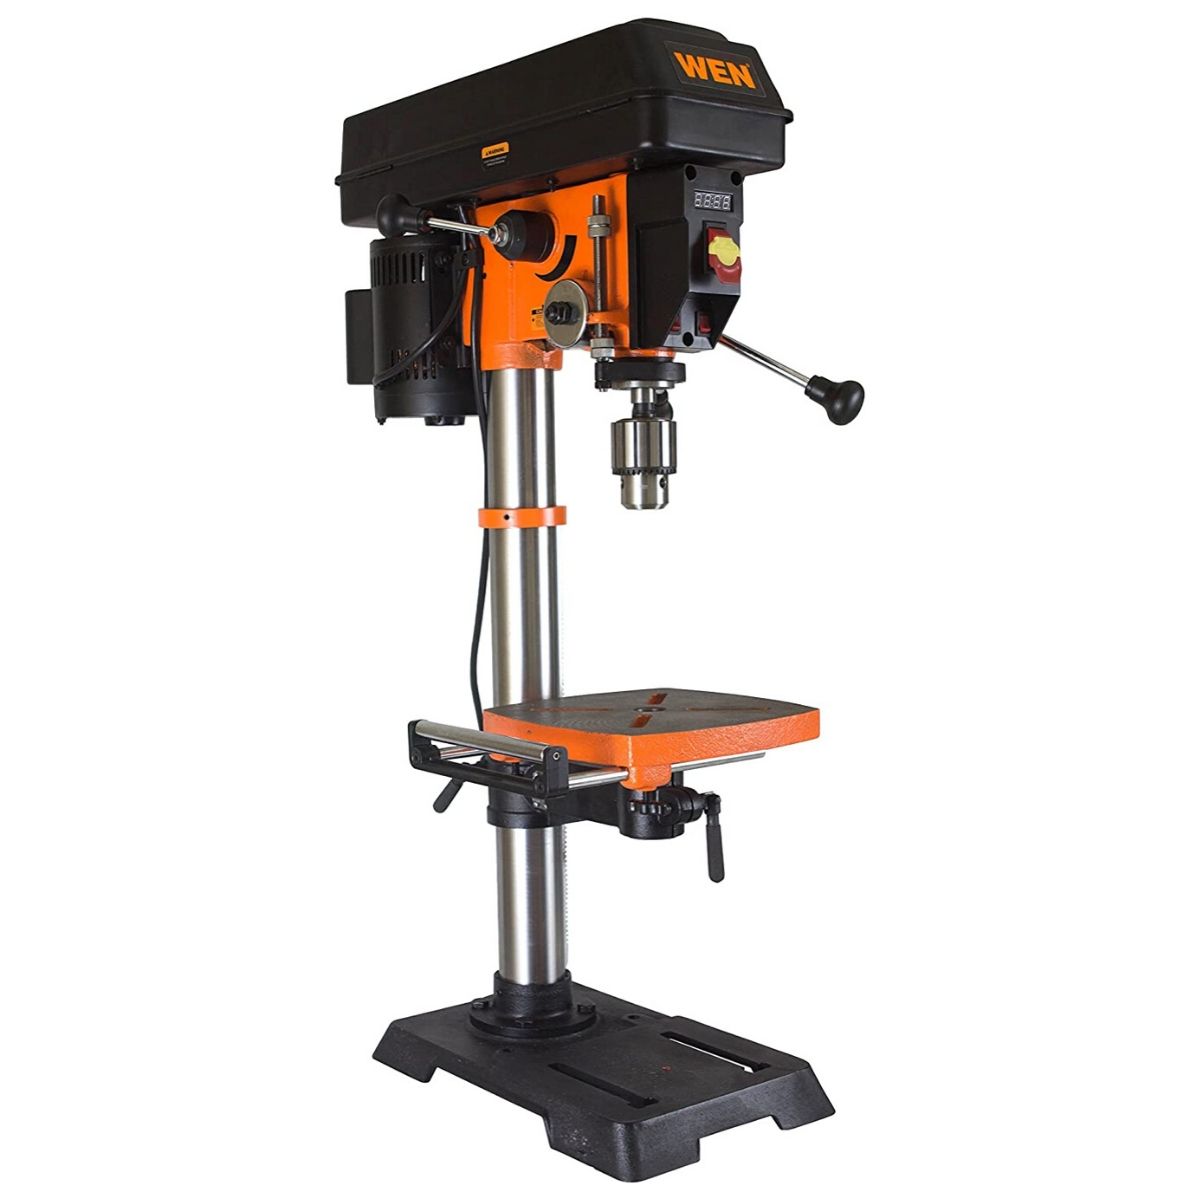 Wen 4214 5-Amp 12-Inch Variable Speed Drill Press